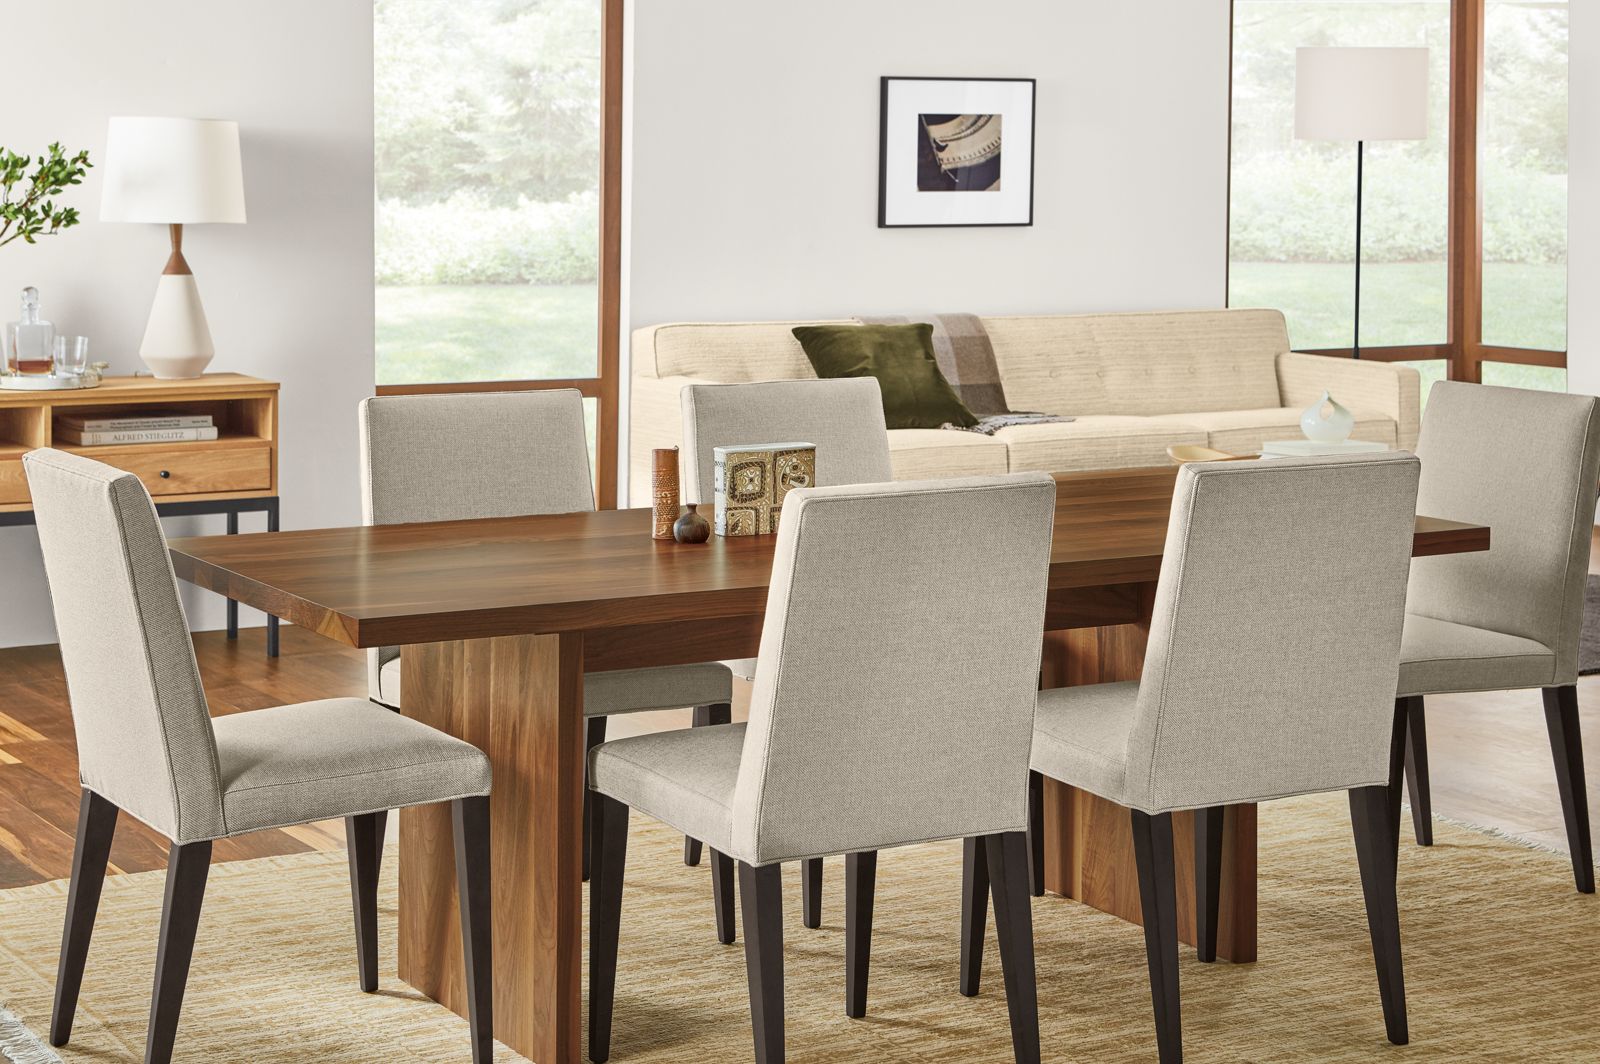 Detail of Corbett dining table in walnut in dining room with Ava side chairs.